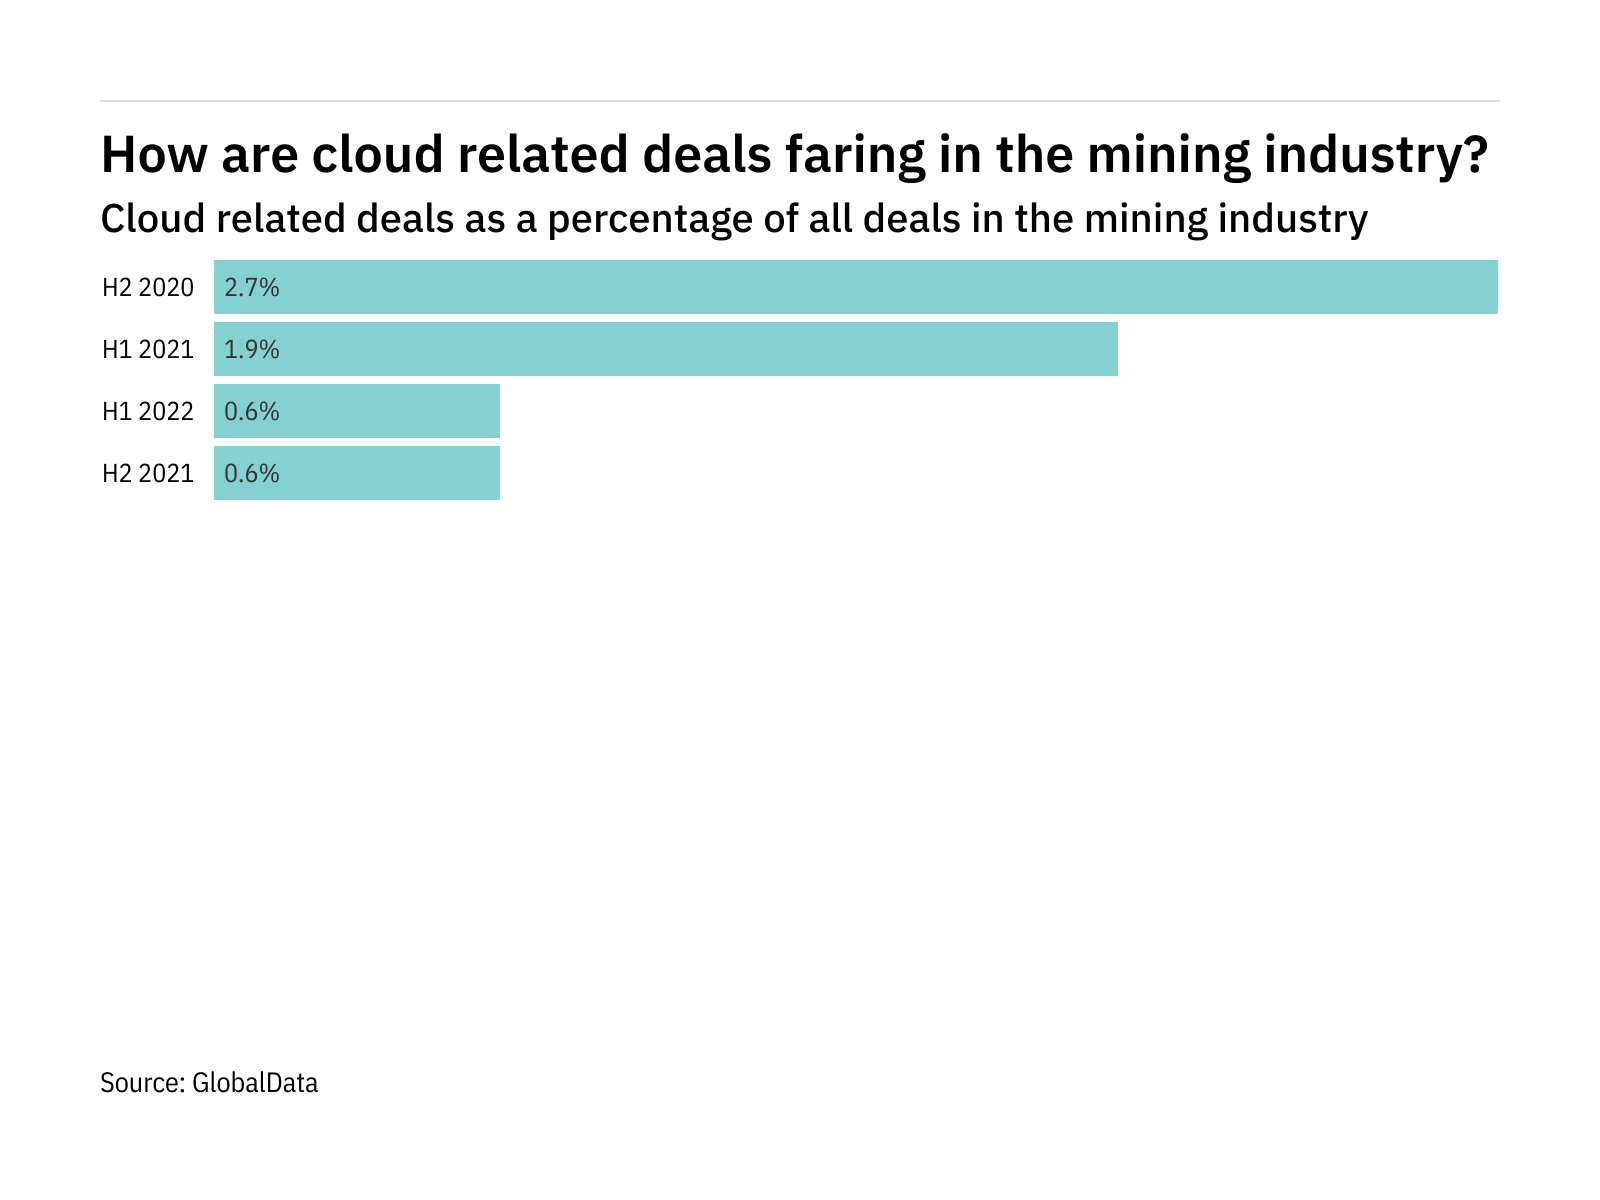 Deals relating to cloud decreased significantly in the mining industry in H1 2022